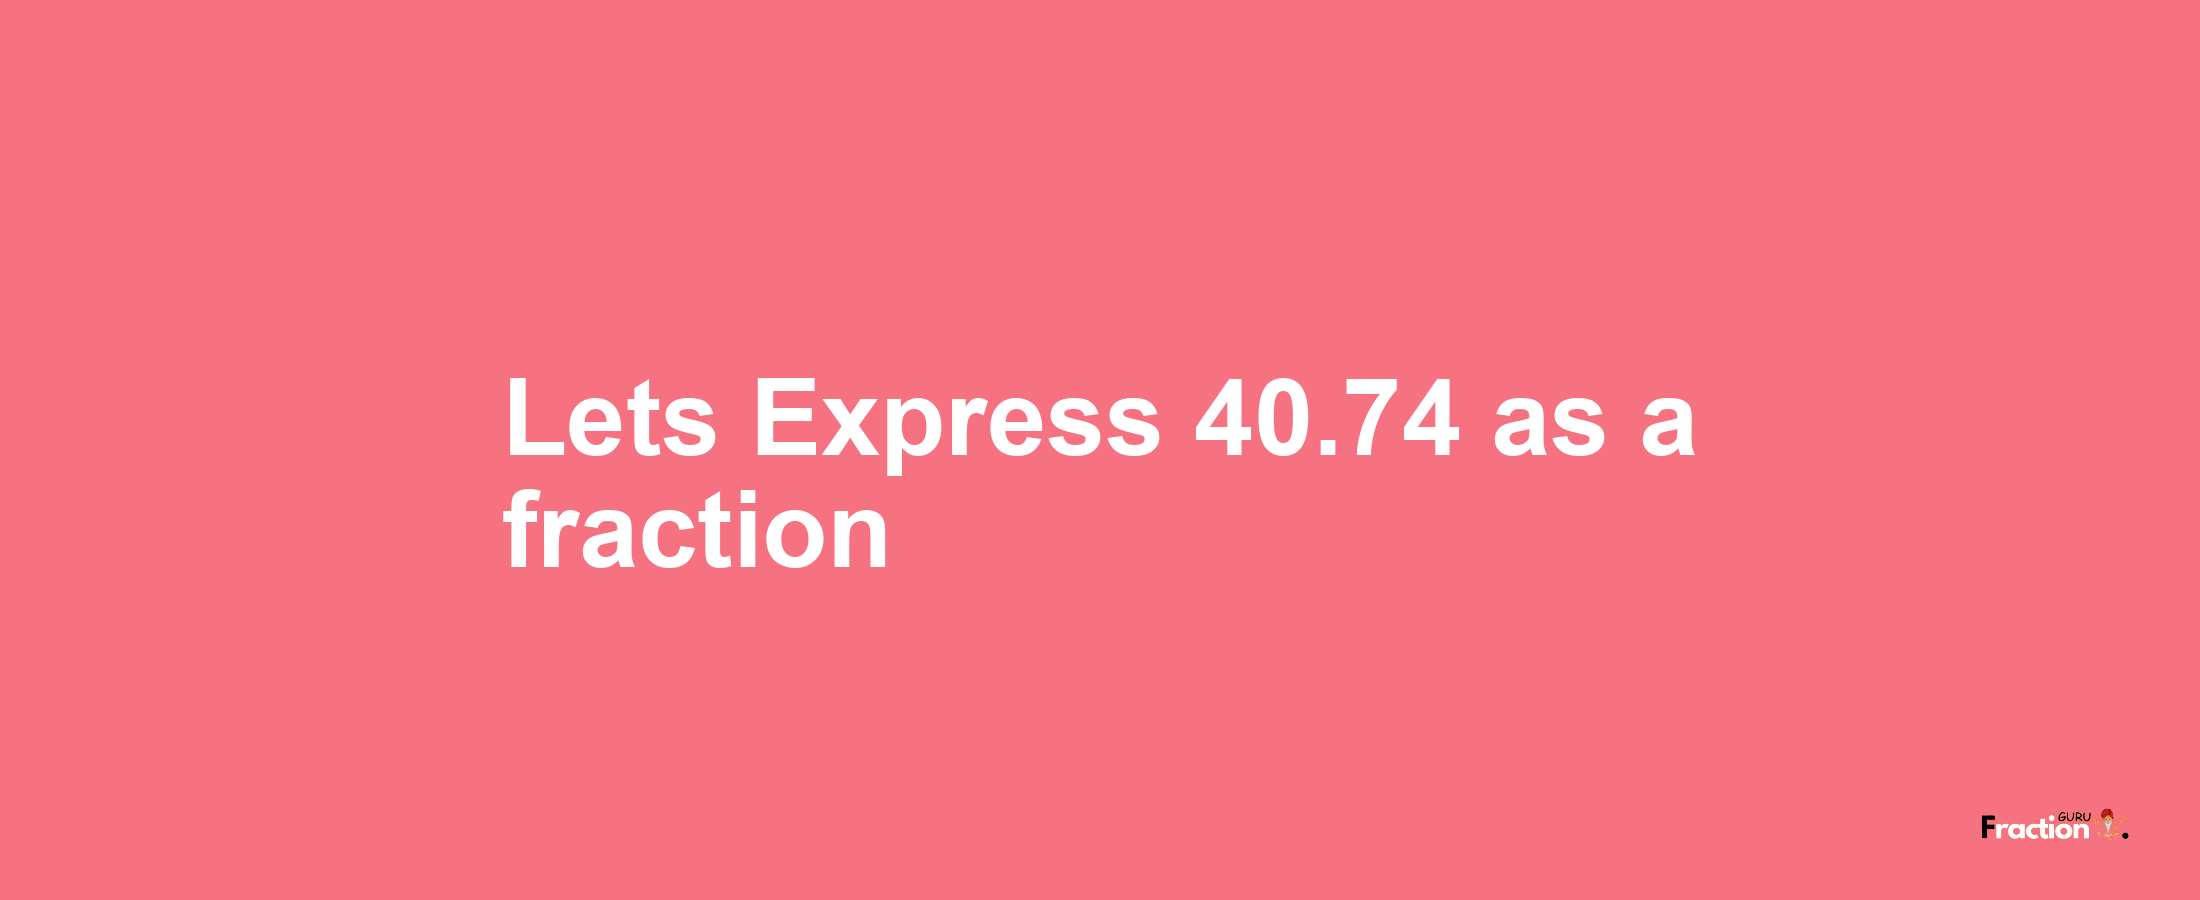 Lets Express 40.74 as afraction